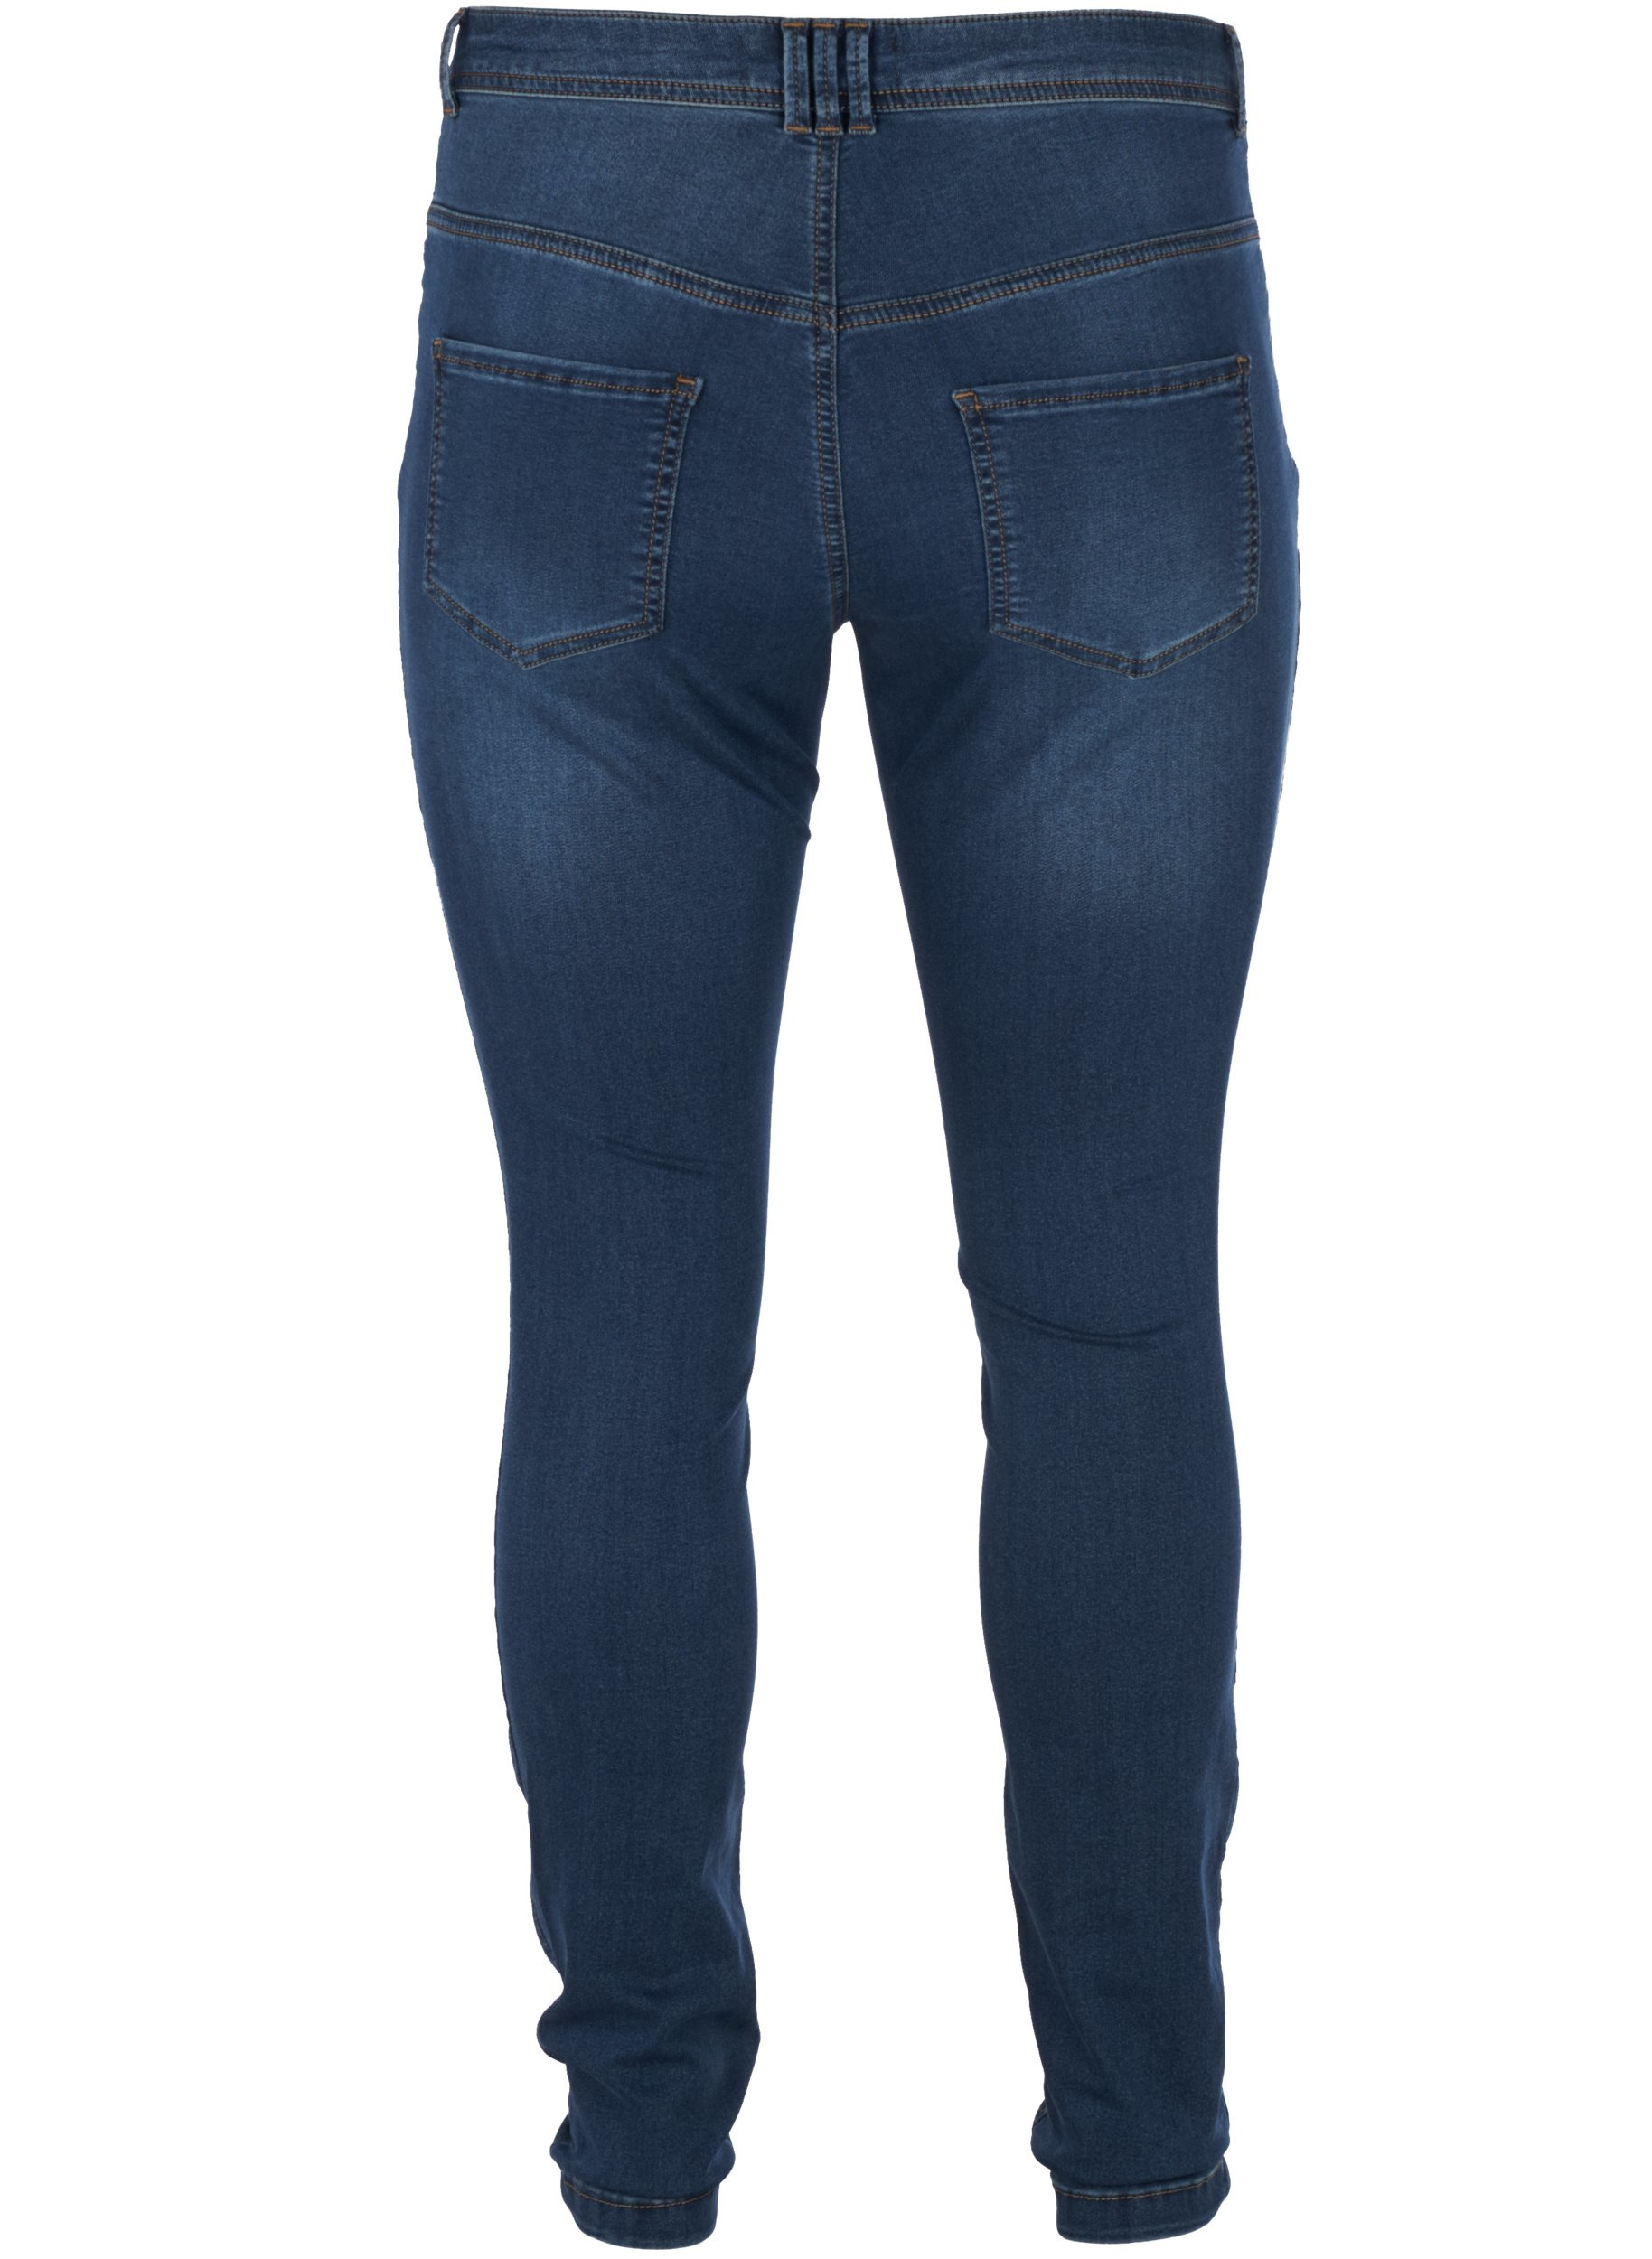 Extra Slim Nille Jeans mit hoher Taille, Blue d. washed, Packshot image number 1